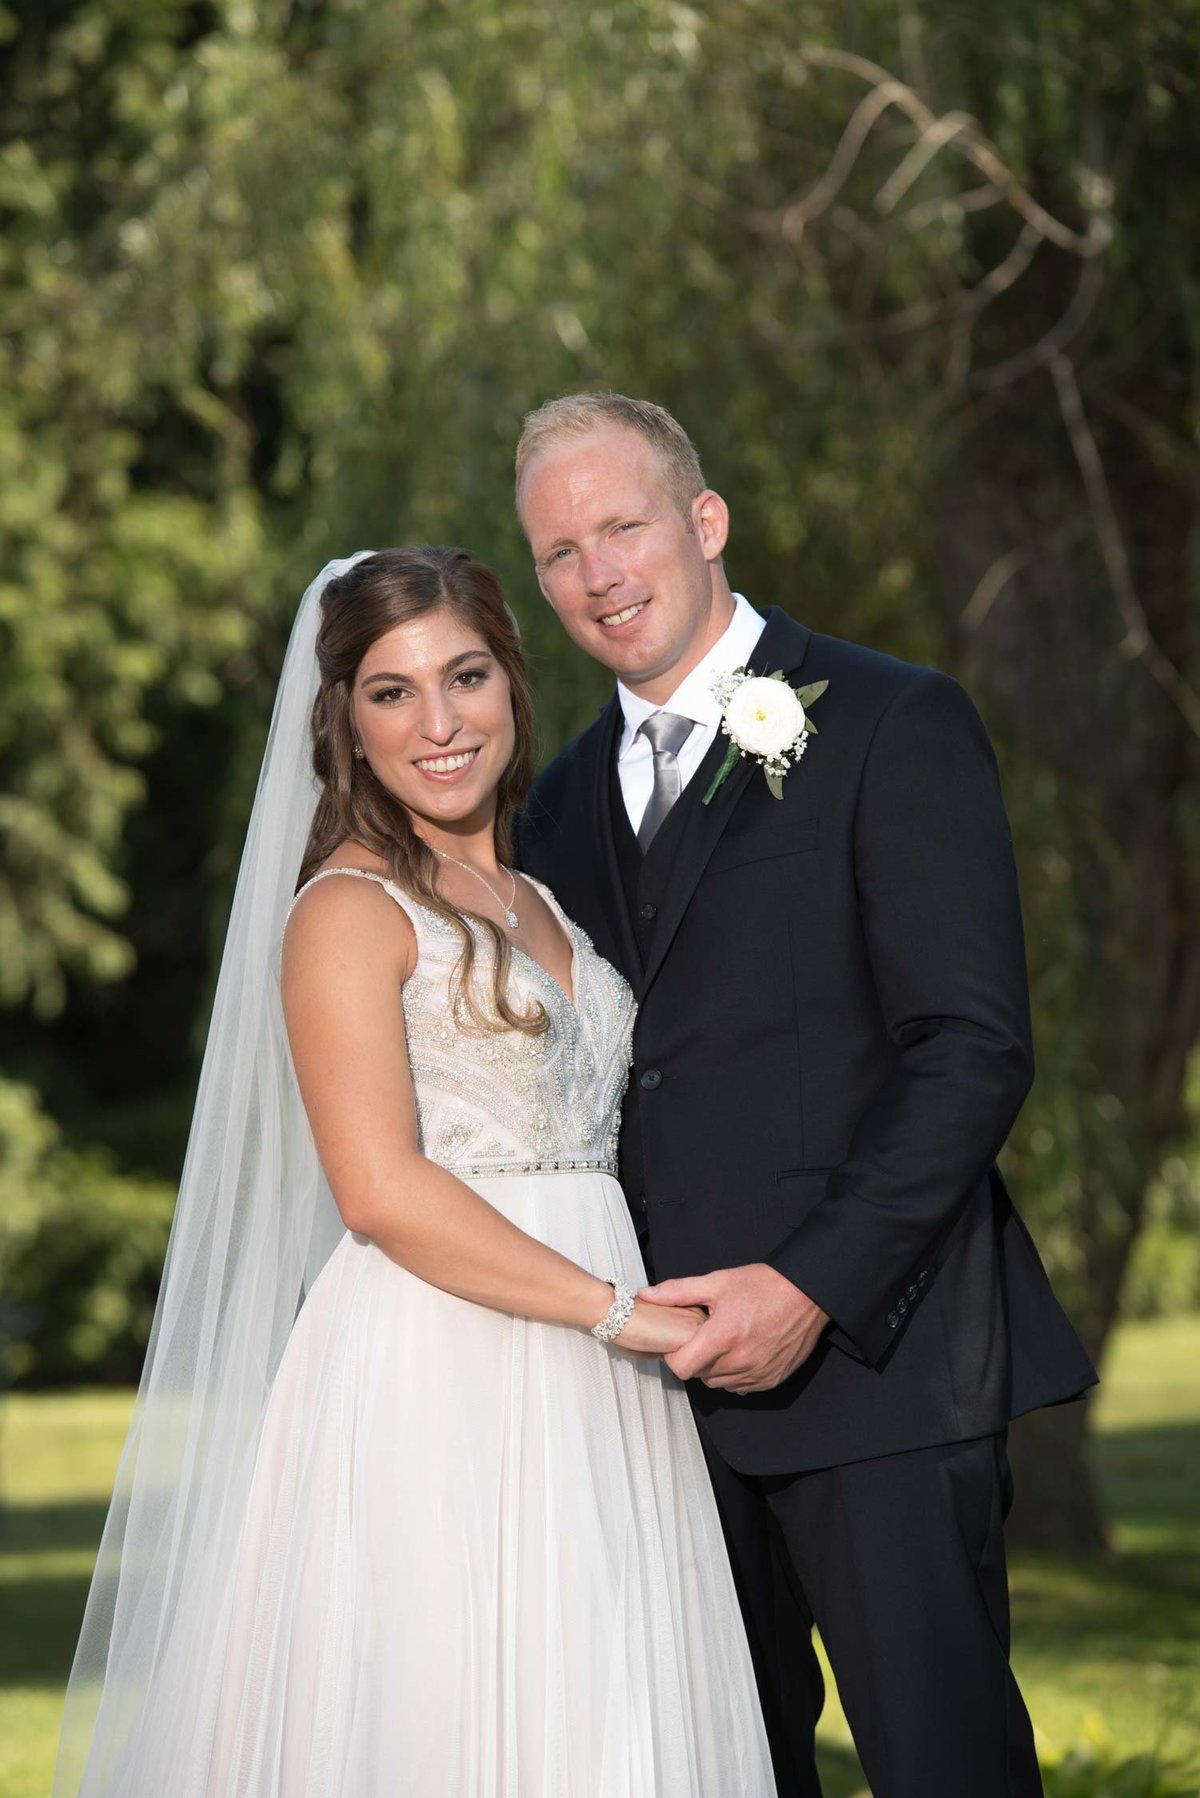 Brie and groom smiling and holding hands outside at Flowerfield